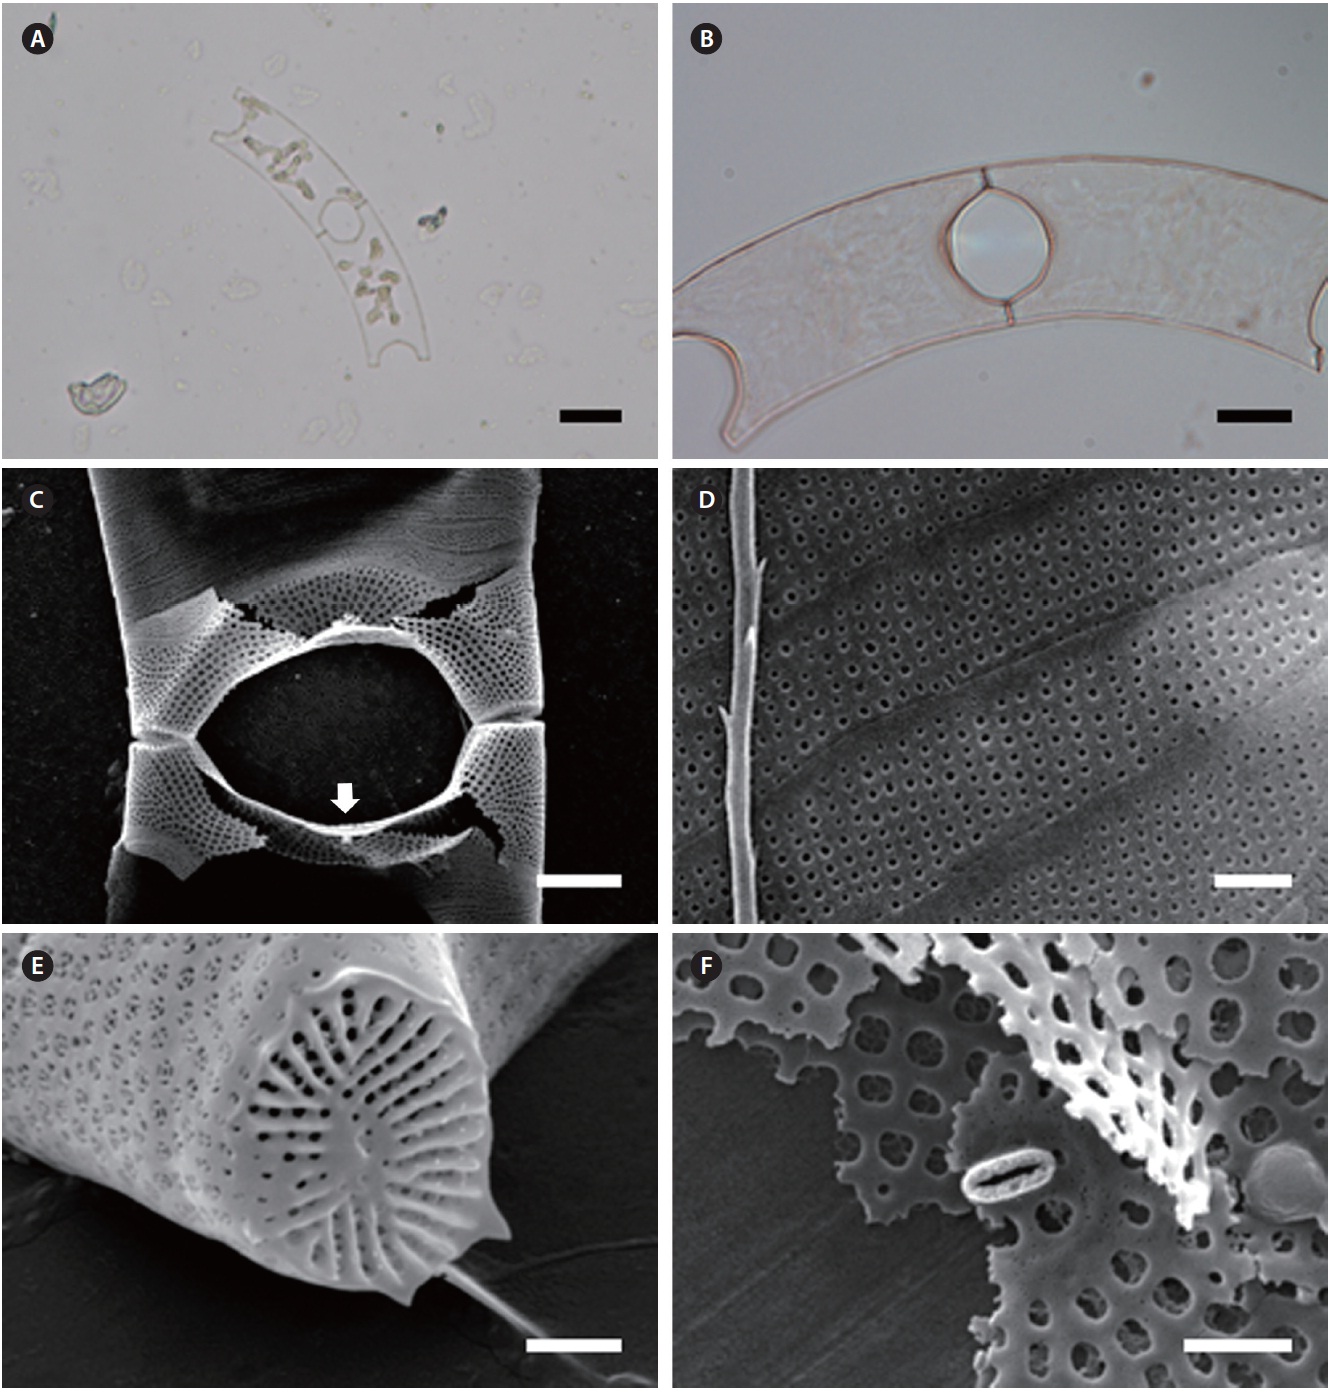 Eucampia groenlandica. (A) Two-celled colony form, cells slightly curved chain with several plastids, light microscopy (LM). (B) Almost circular to rounded rectangular aperture shape, LM. (C) Short and broad elevations with form of risen tips, labiate process (arrow) on the internal valve center, scanning electron microscopy (SEM). (D) Intercalary bands with rows of puncta, SEM. (E) Ocellus with linear ribs, SEM. (F) Labiate process, SEM. Scale bars represent: A, 20 μm; B, 10 μm; C, 5 μm; D-F, 1 μm.